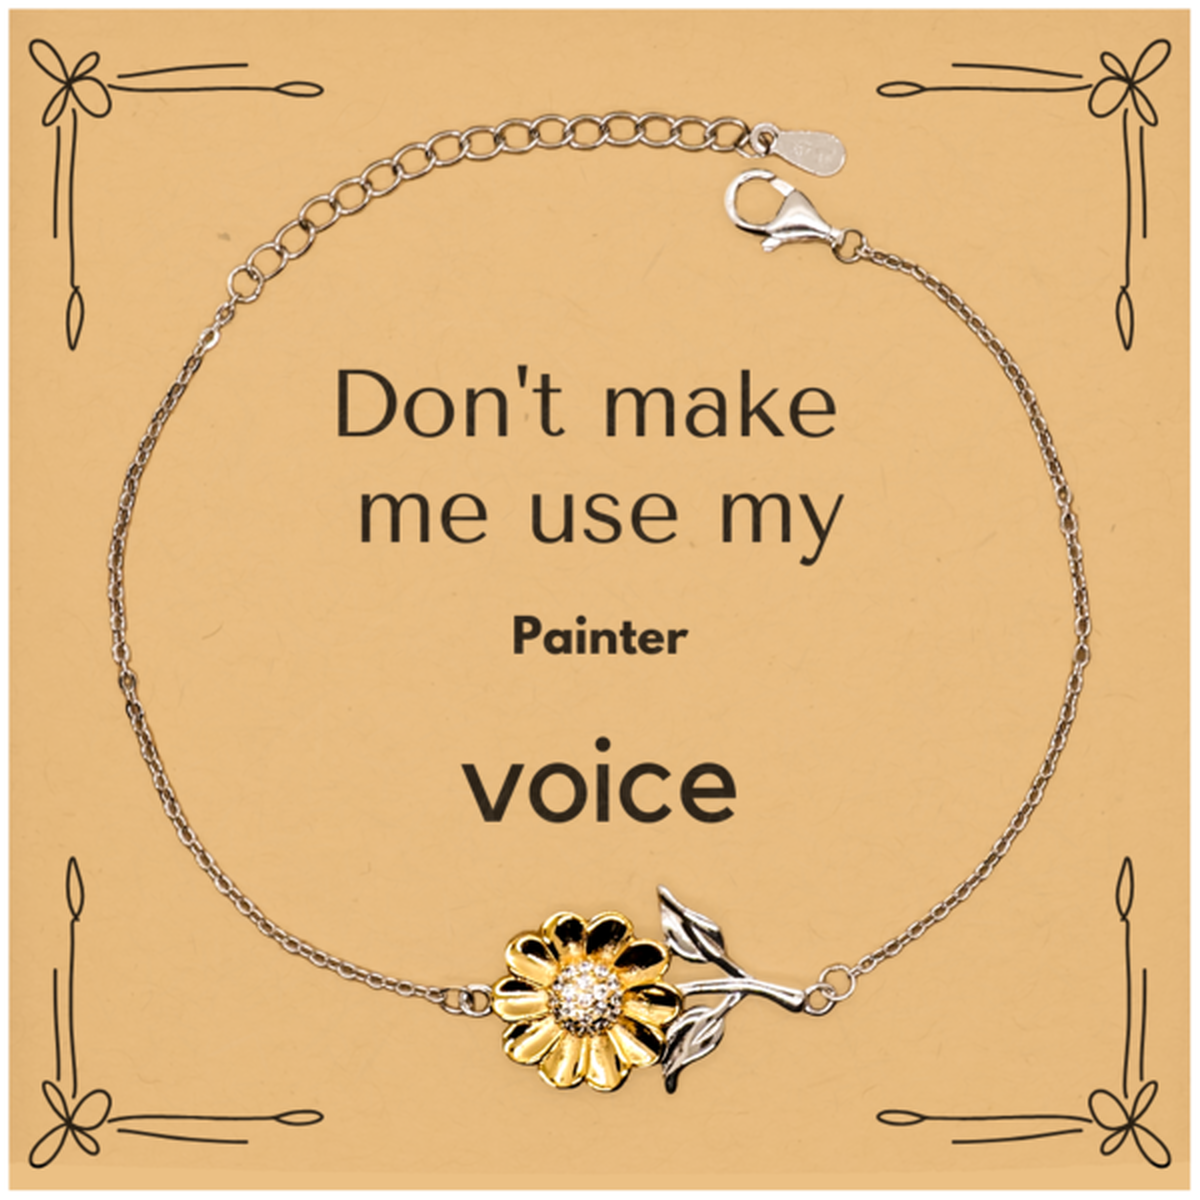 Don't make me use my Painter voice, Sarcasm Painter Card Gifts, Christmas Painter Sunflower Bracelet Birthday Unique Gifts For Painter Coworkers, Men, Women, Colleague, Friends